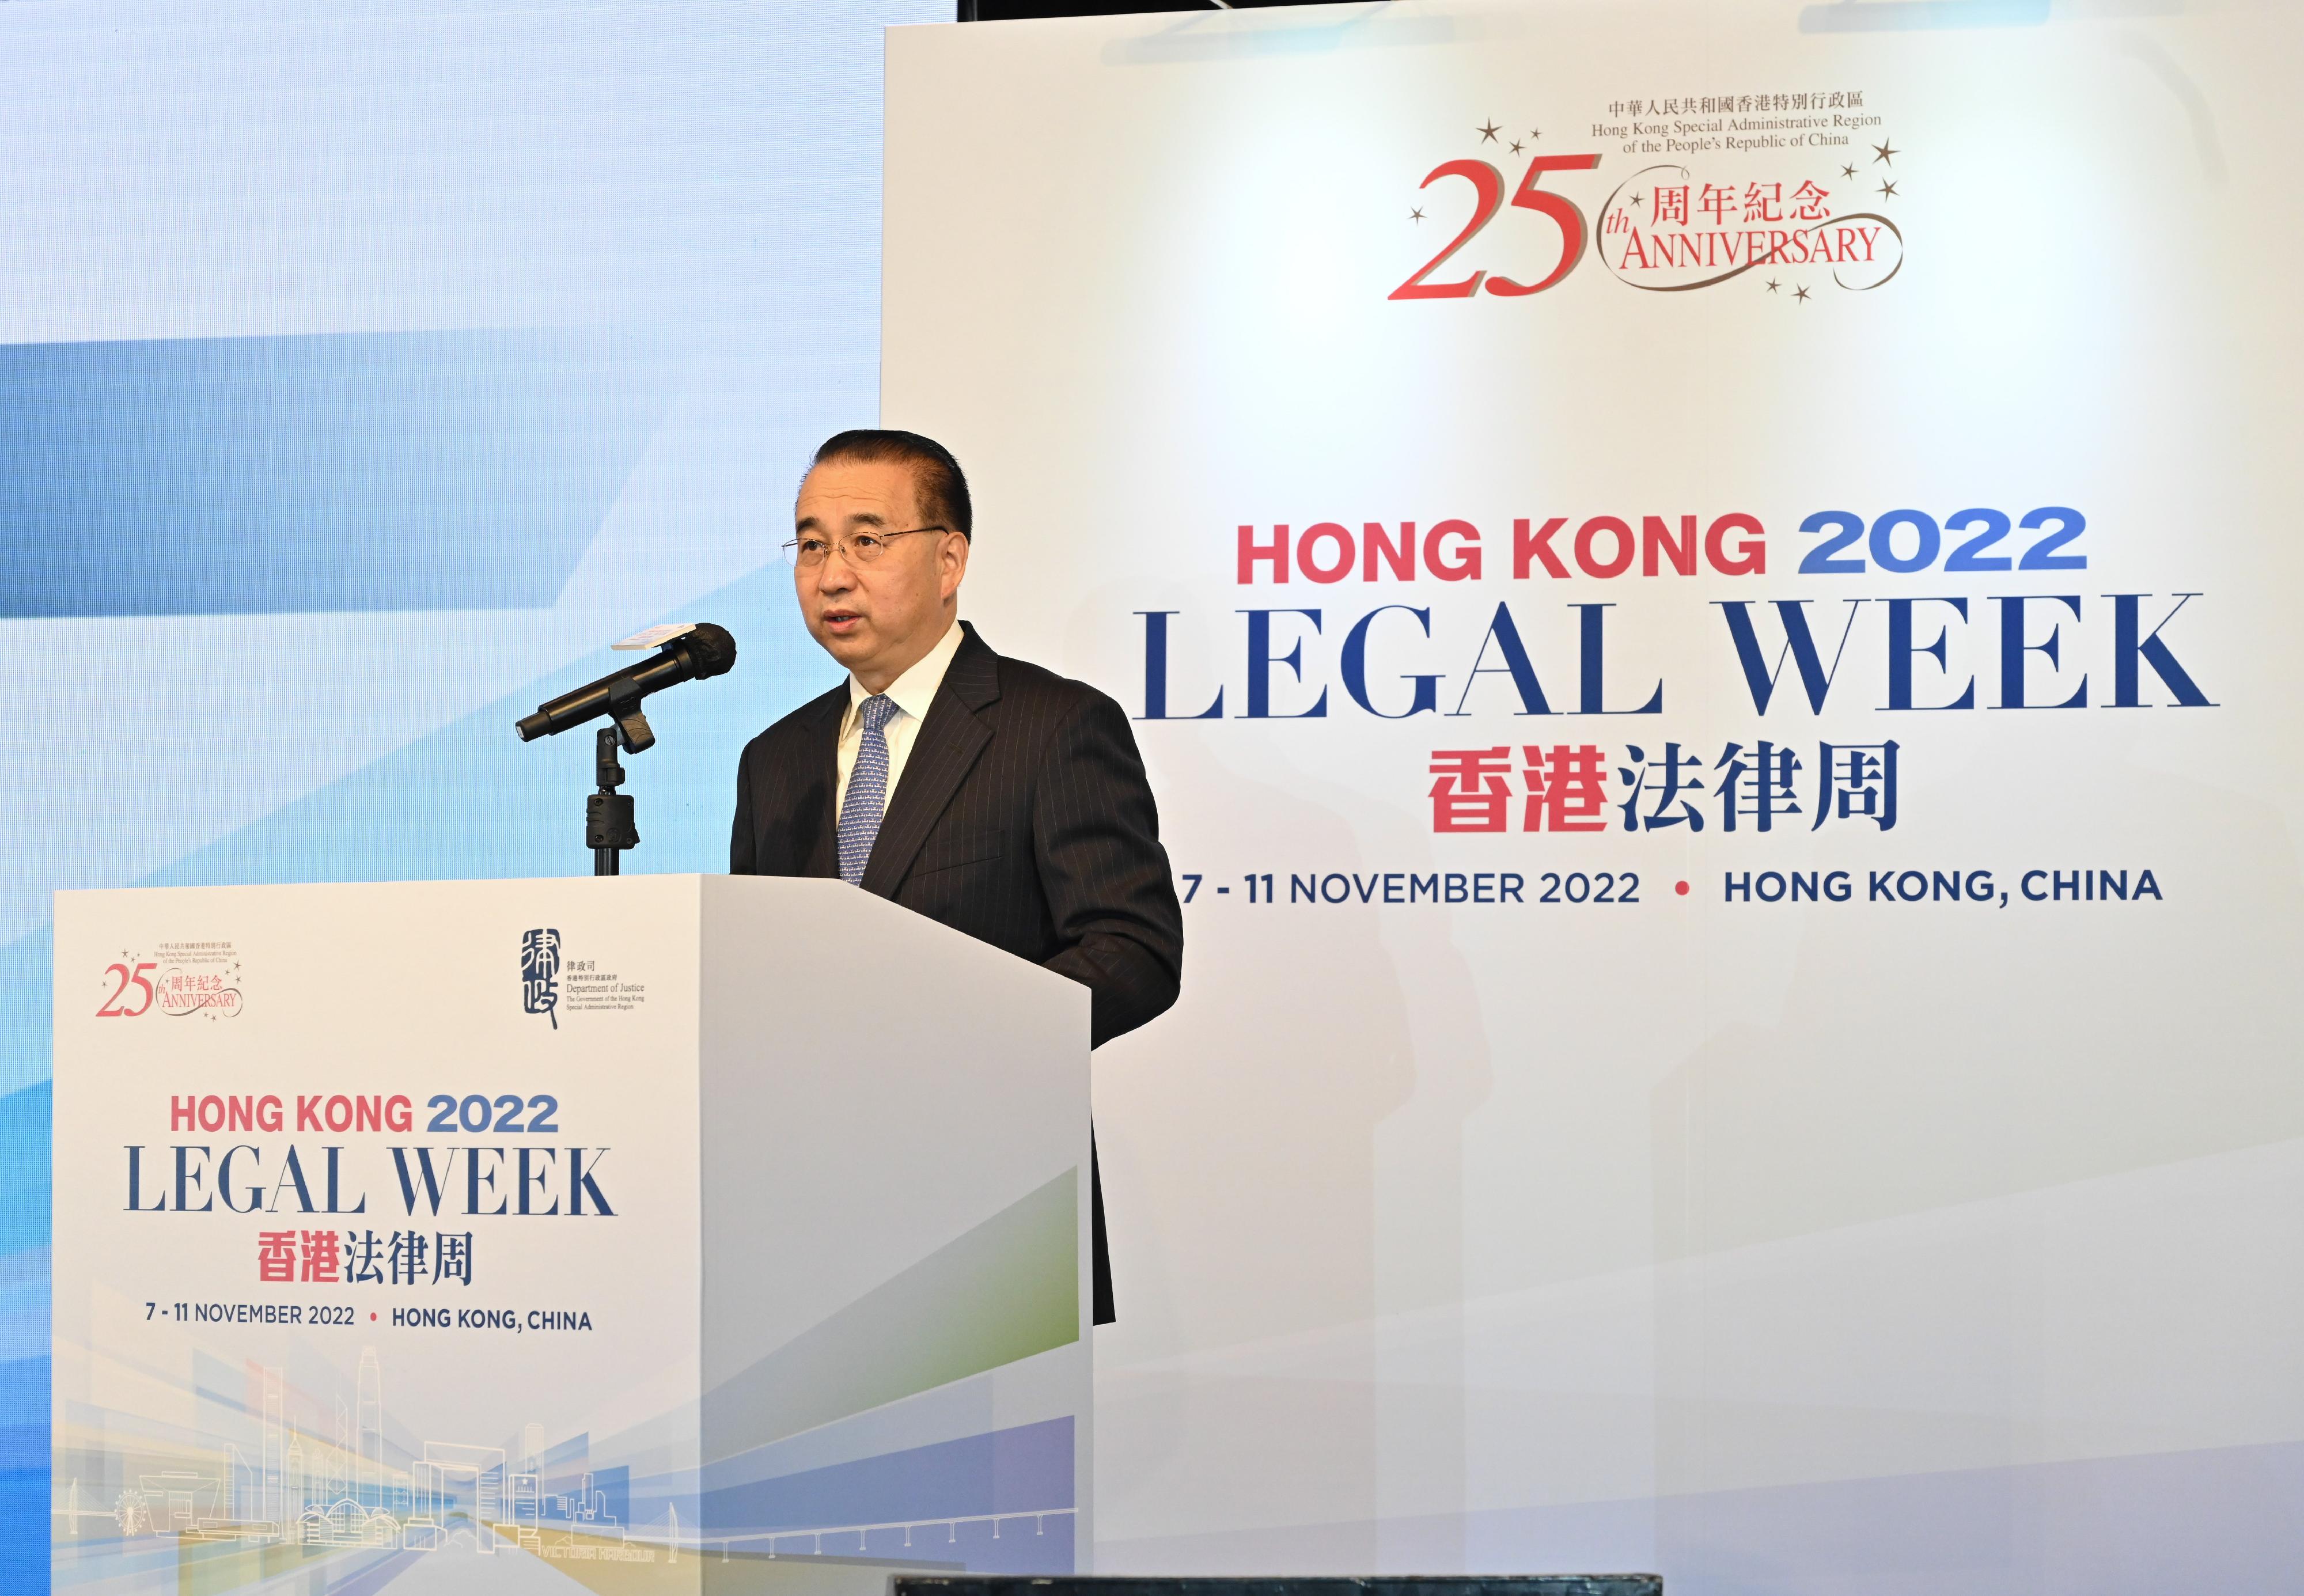 The Commissioner of the Ministry of Foreign Affairs in the Hong Kong Special Administrative Region, Mr Liu Guangyuan, speaks at the Asia-Pacific Private International Law Summit under the Hong Kong Legal Week 2022 today (November 7).